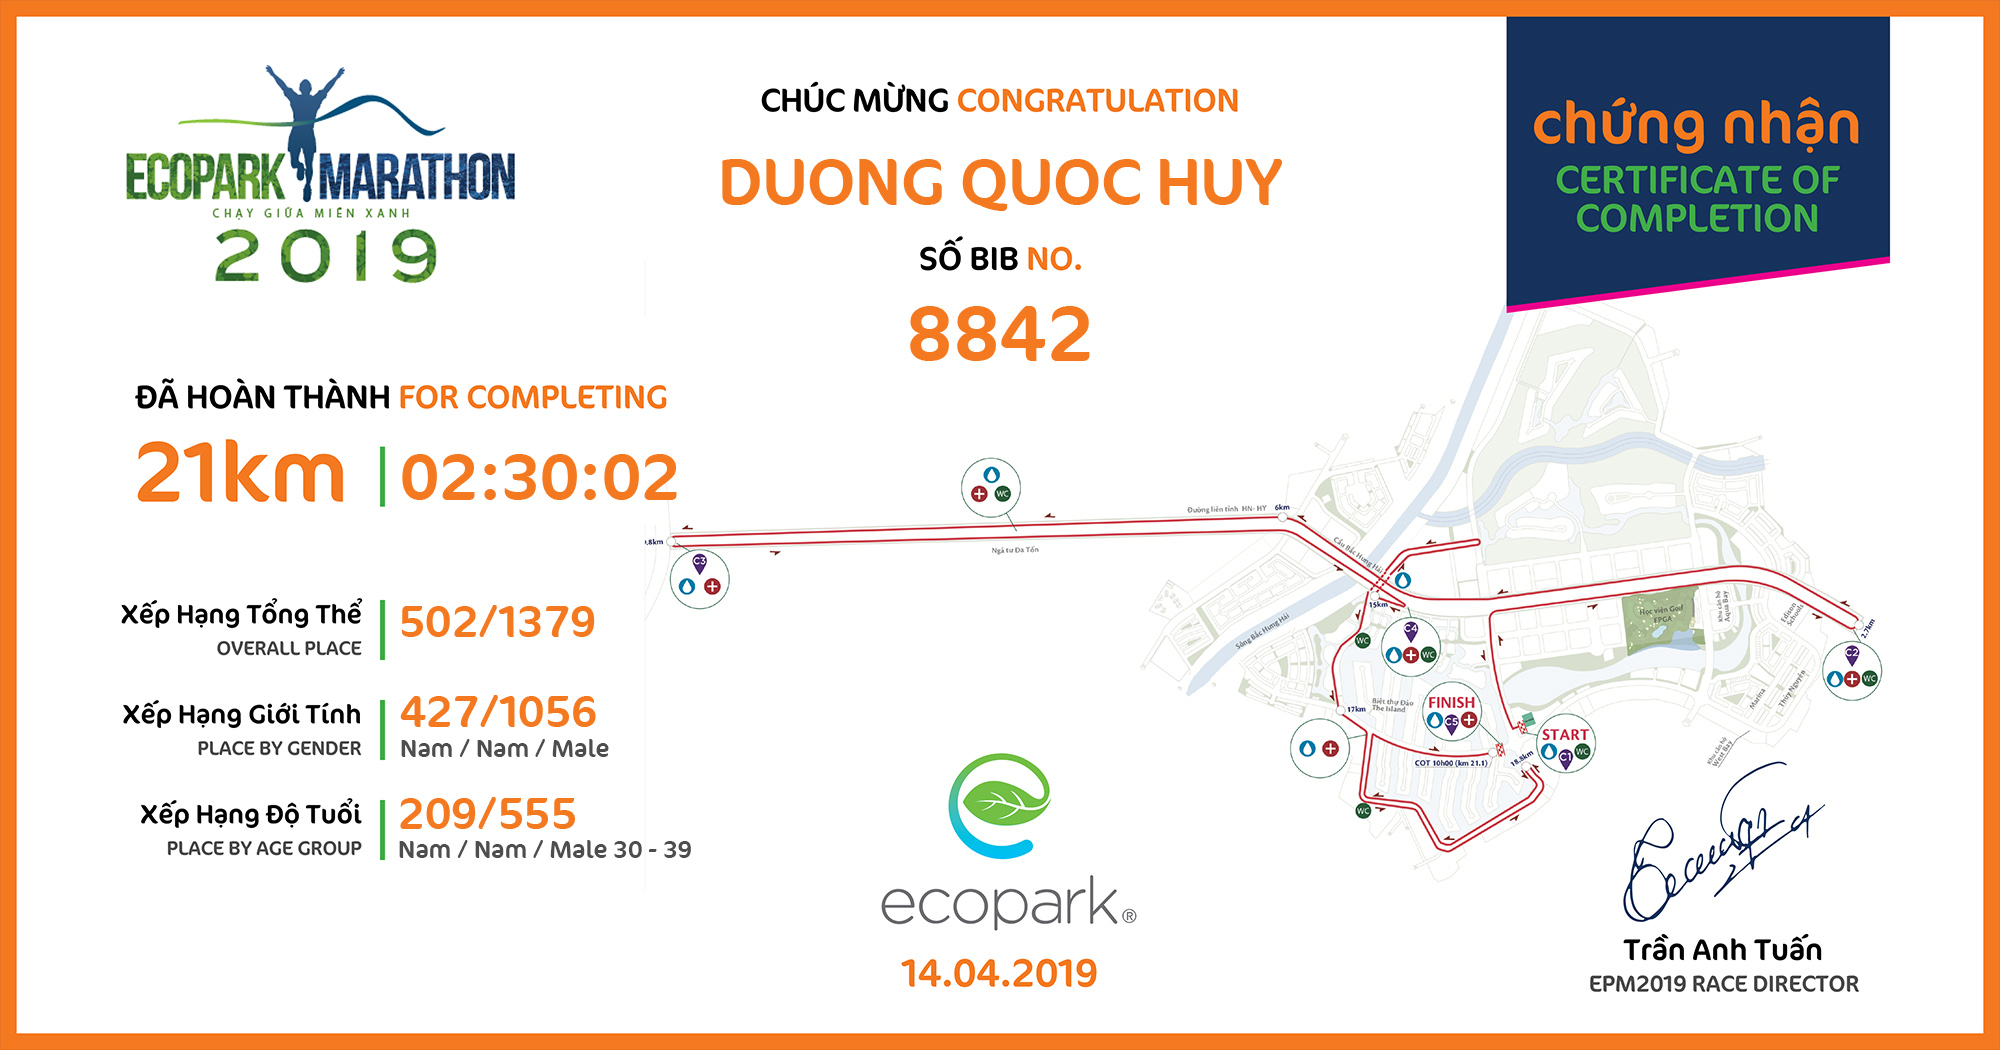 8842 - Duong Quoc Huy